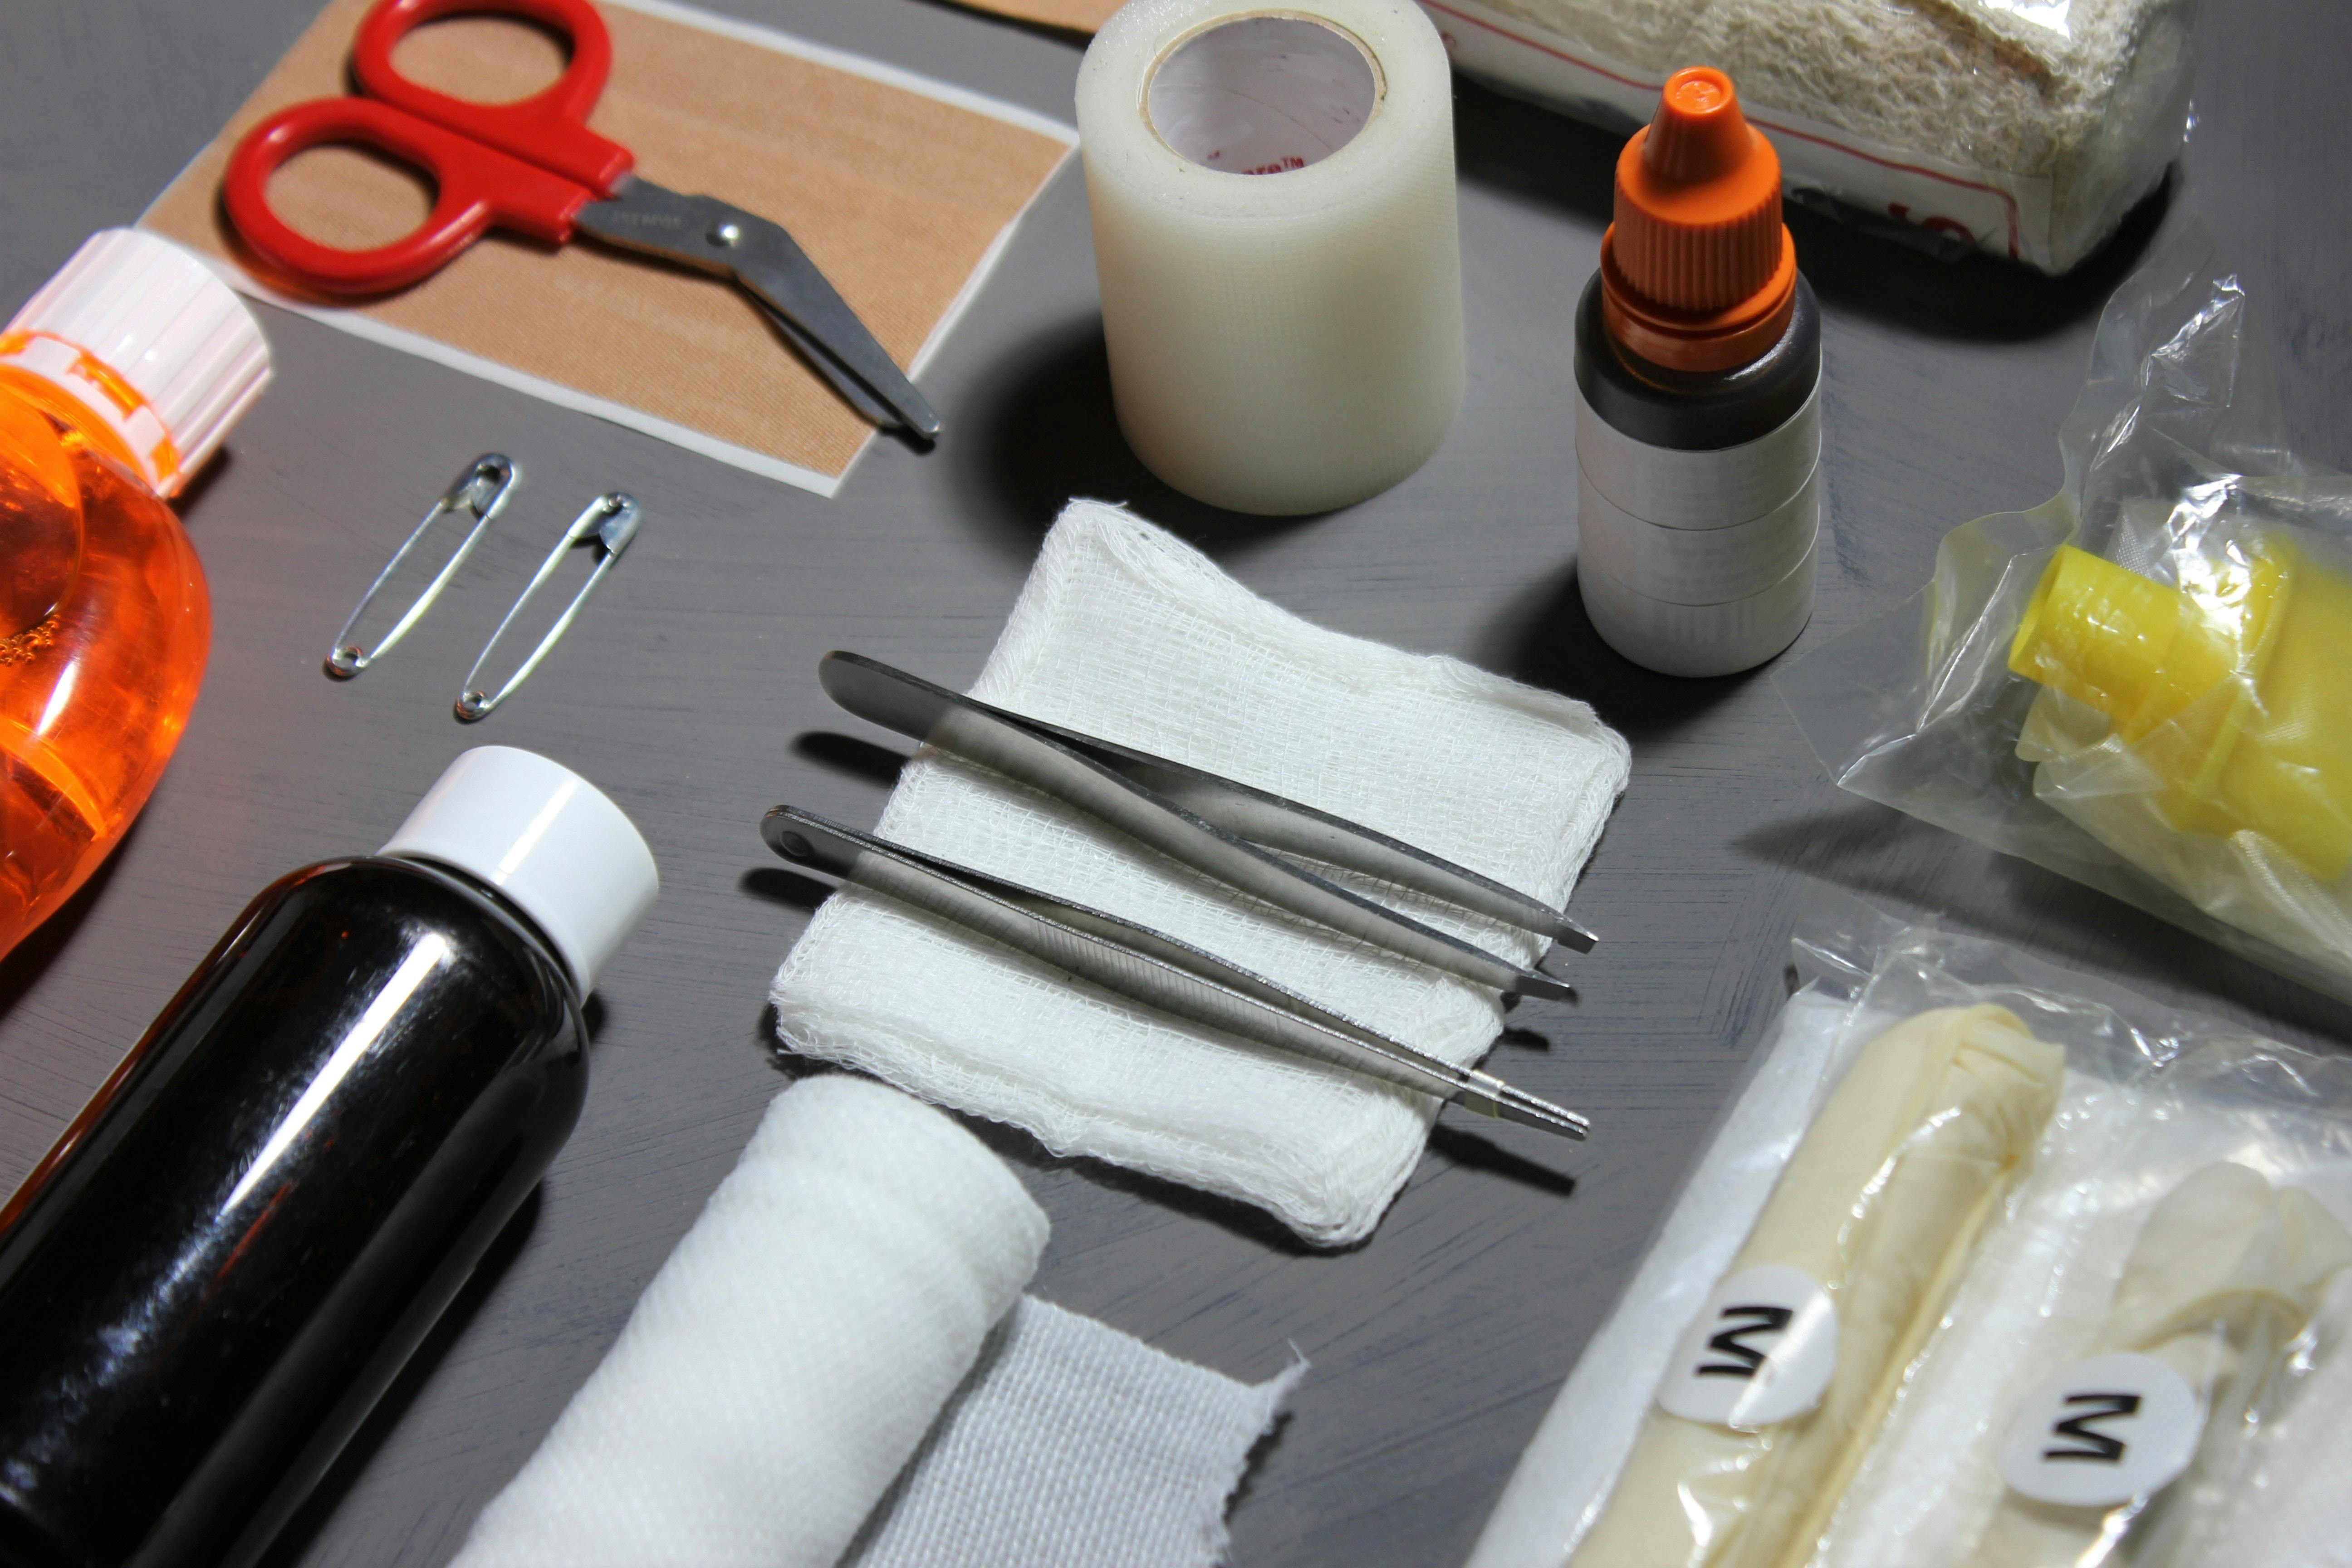 The contents of a first aid kit laid out on a table, including tweezers, tape, scissors, and gauze.